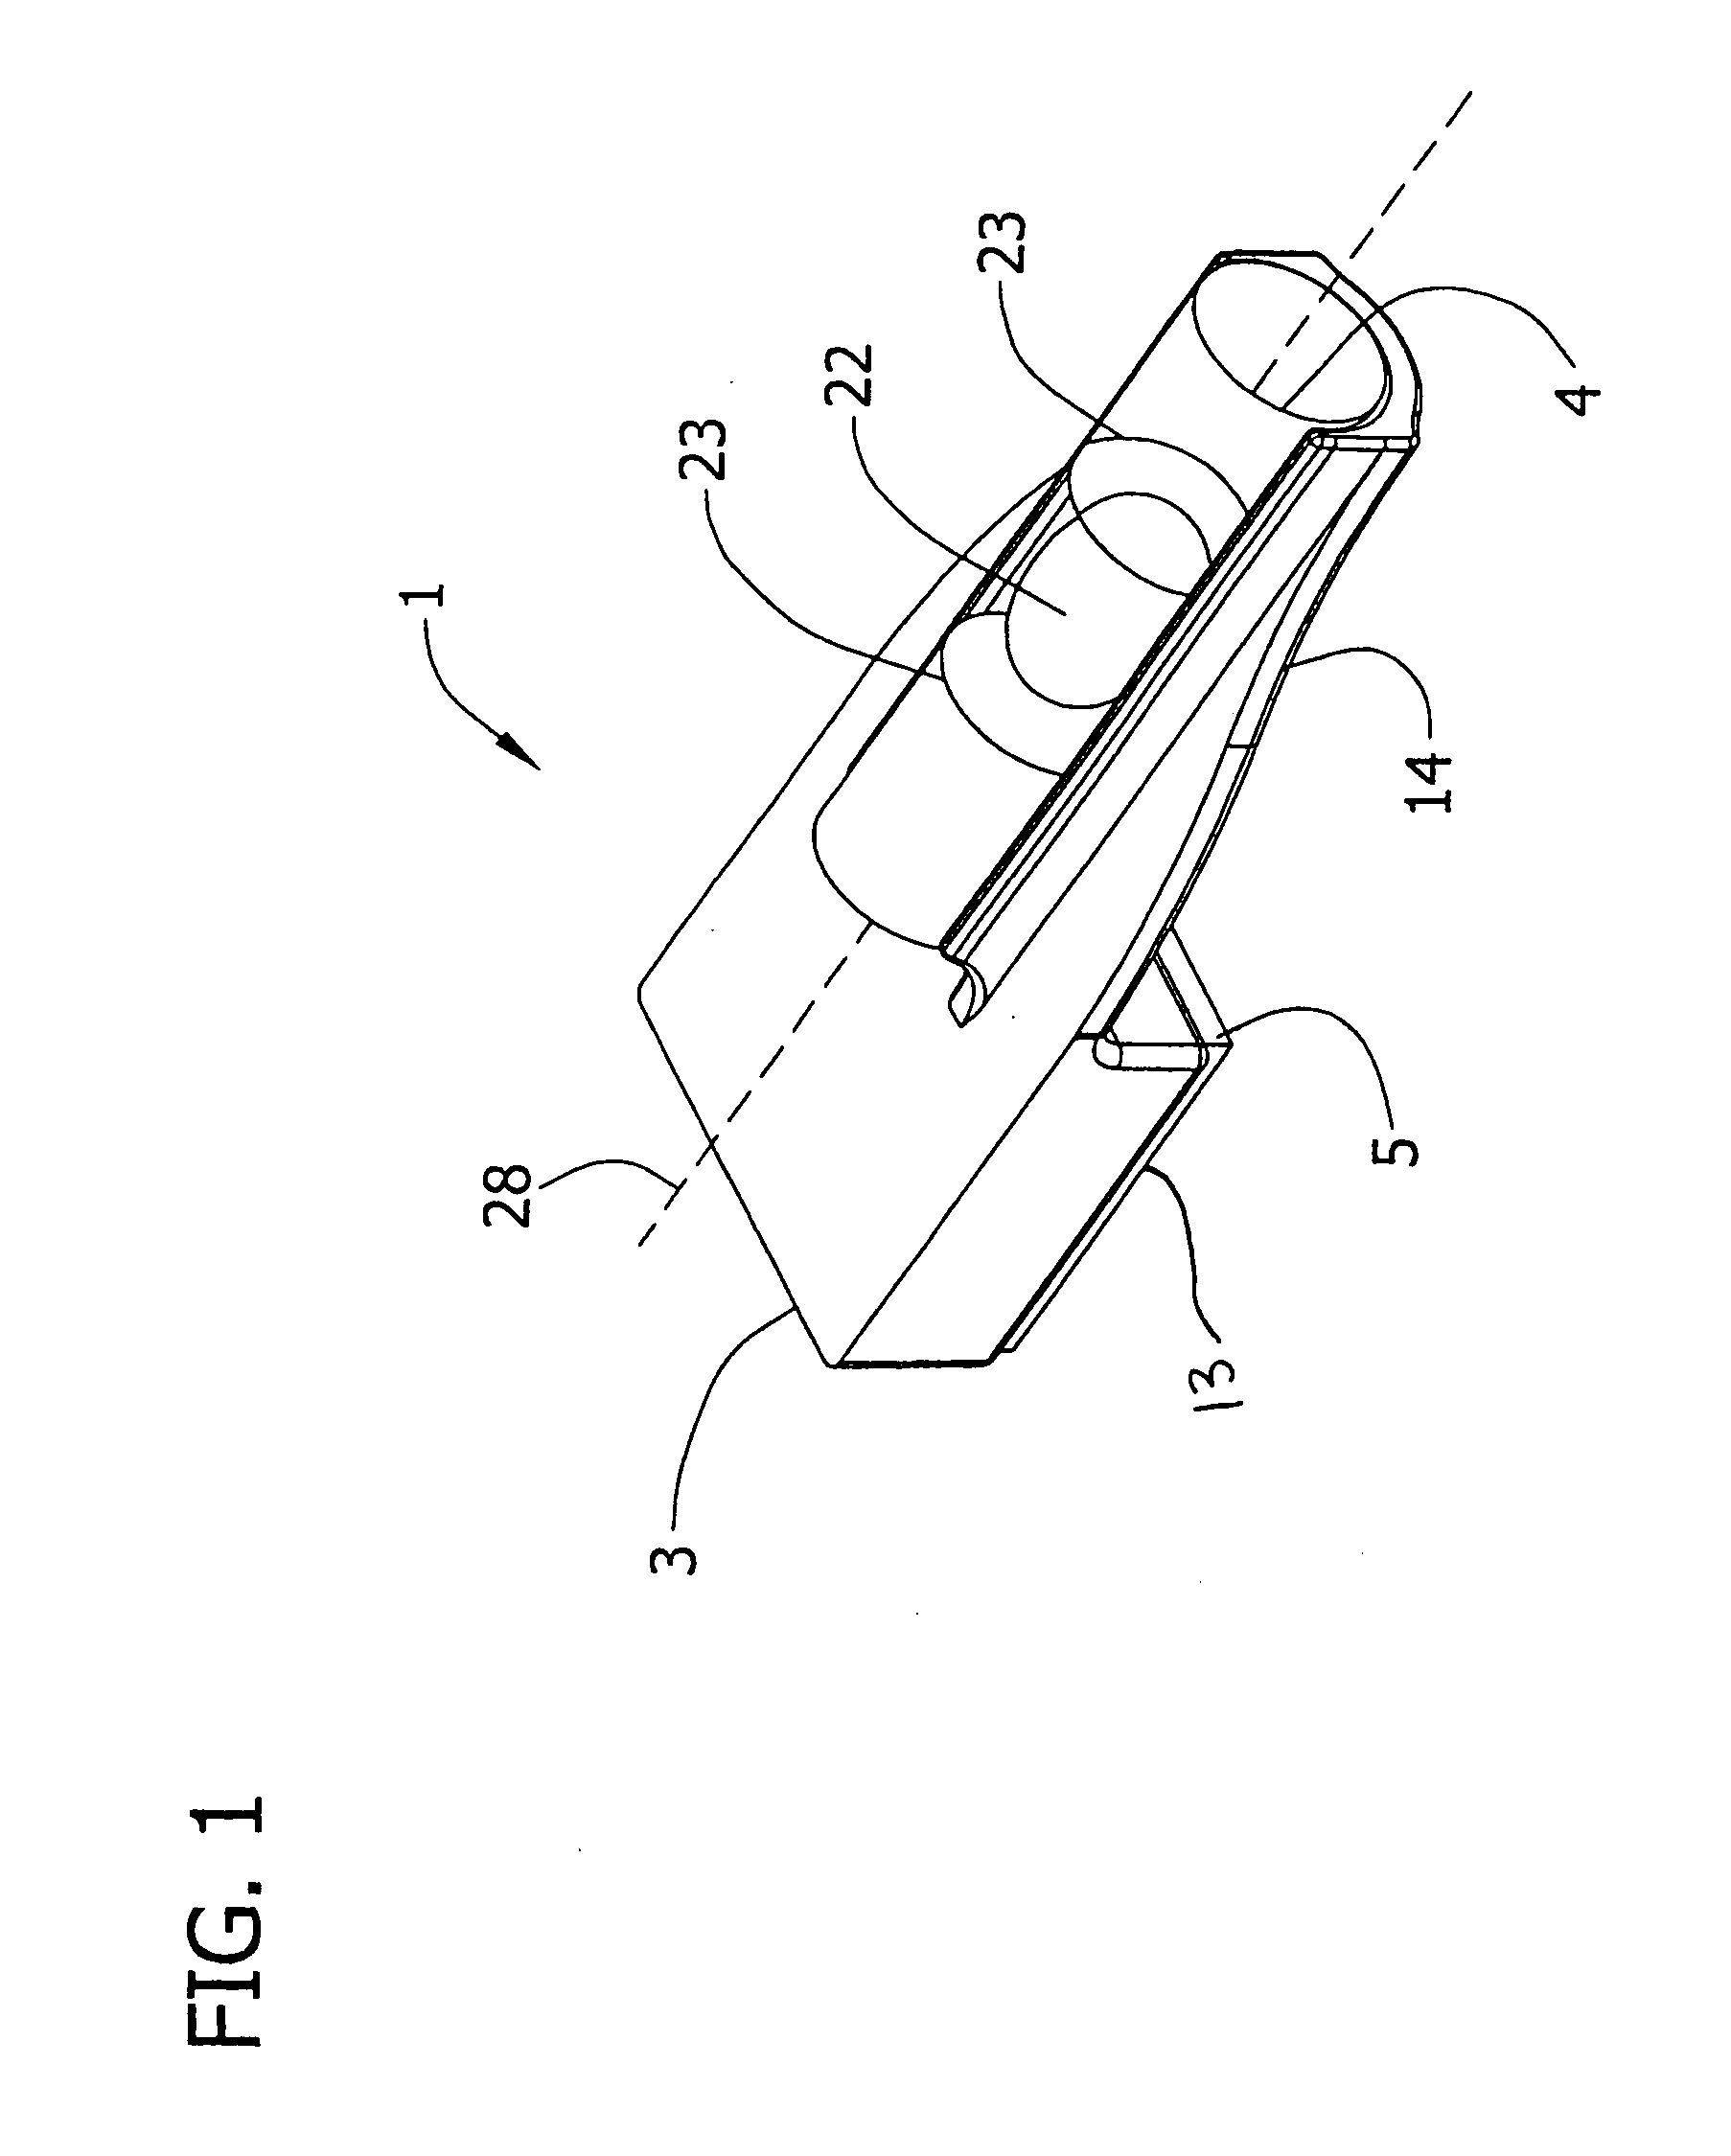 Method and apparatus for alignment of firearm sights